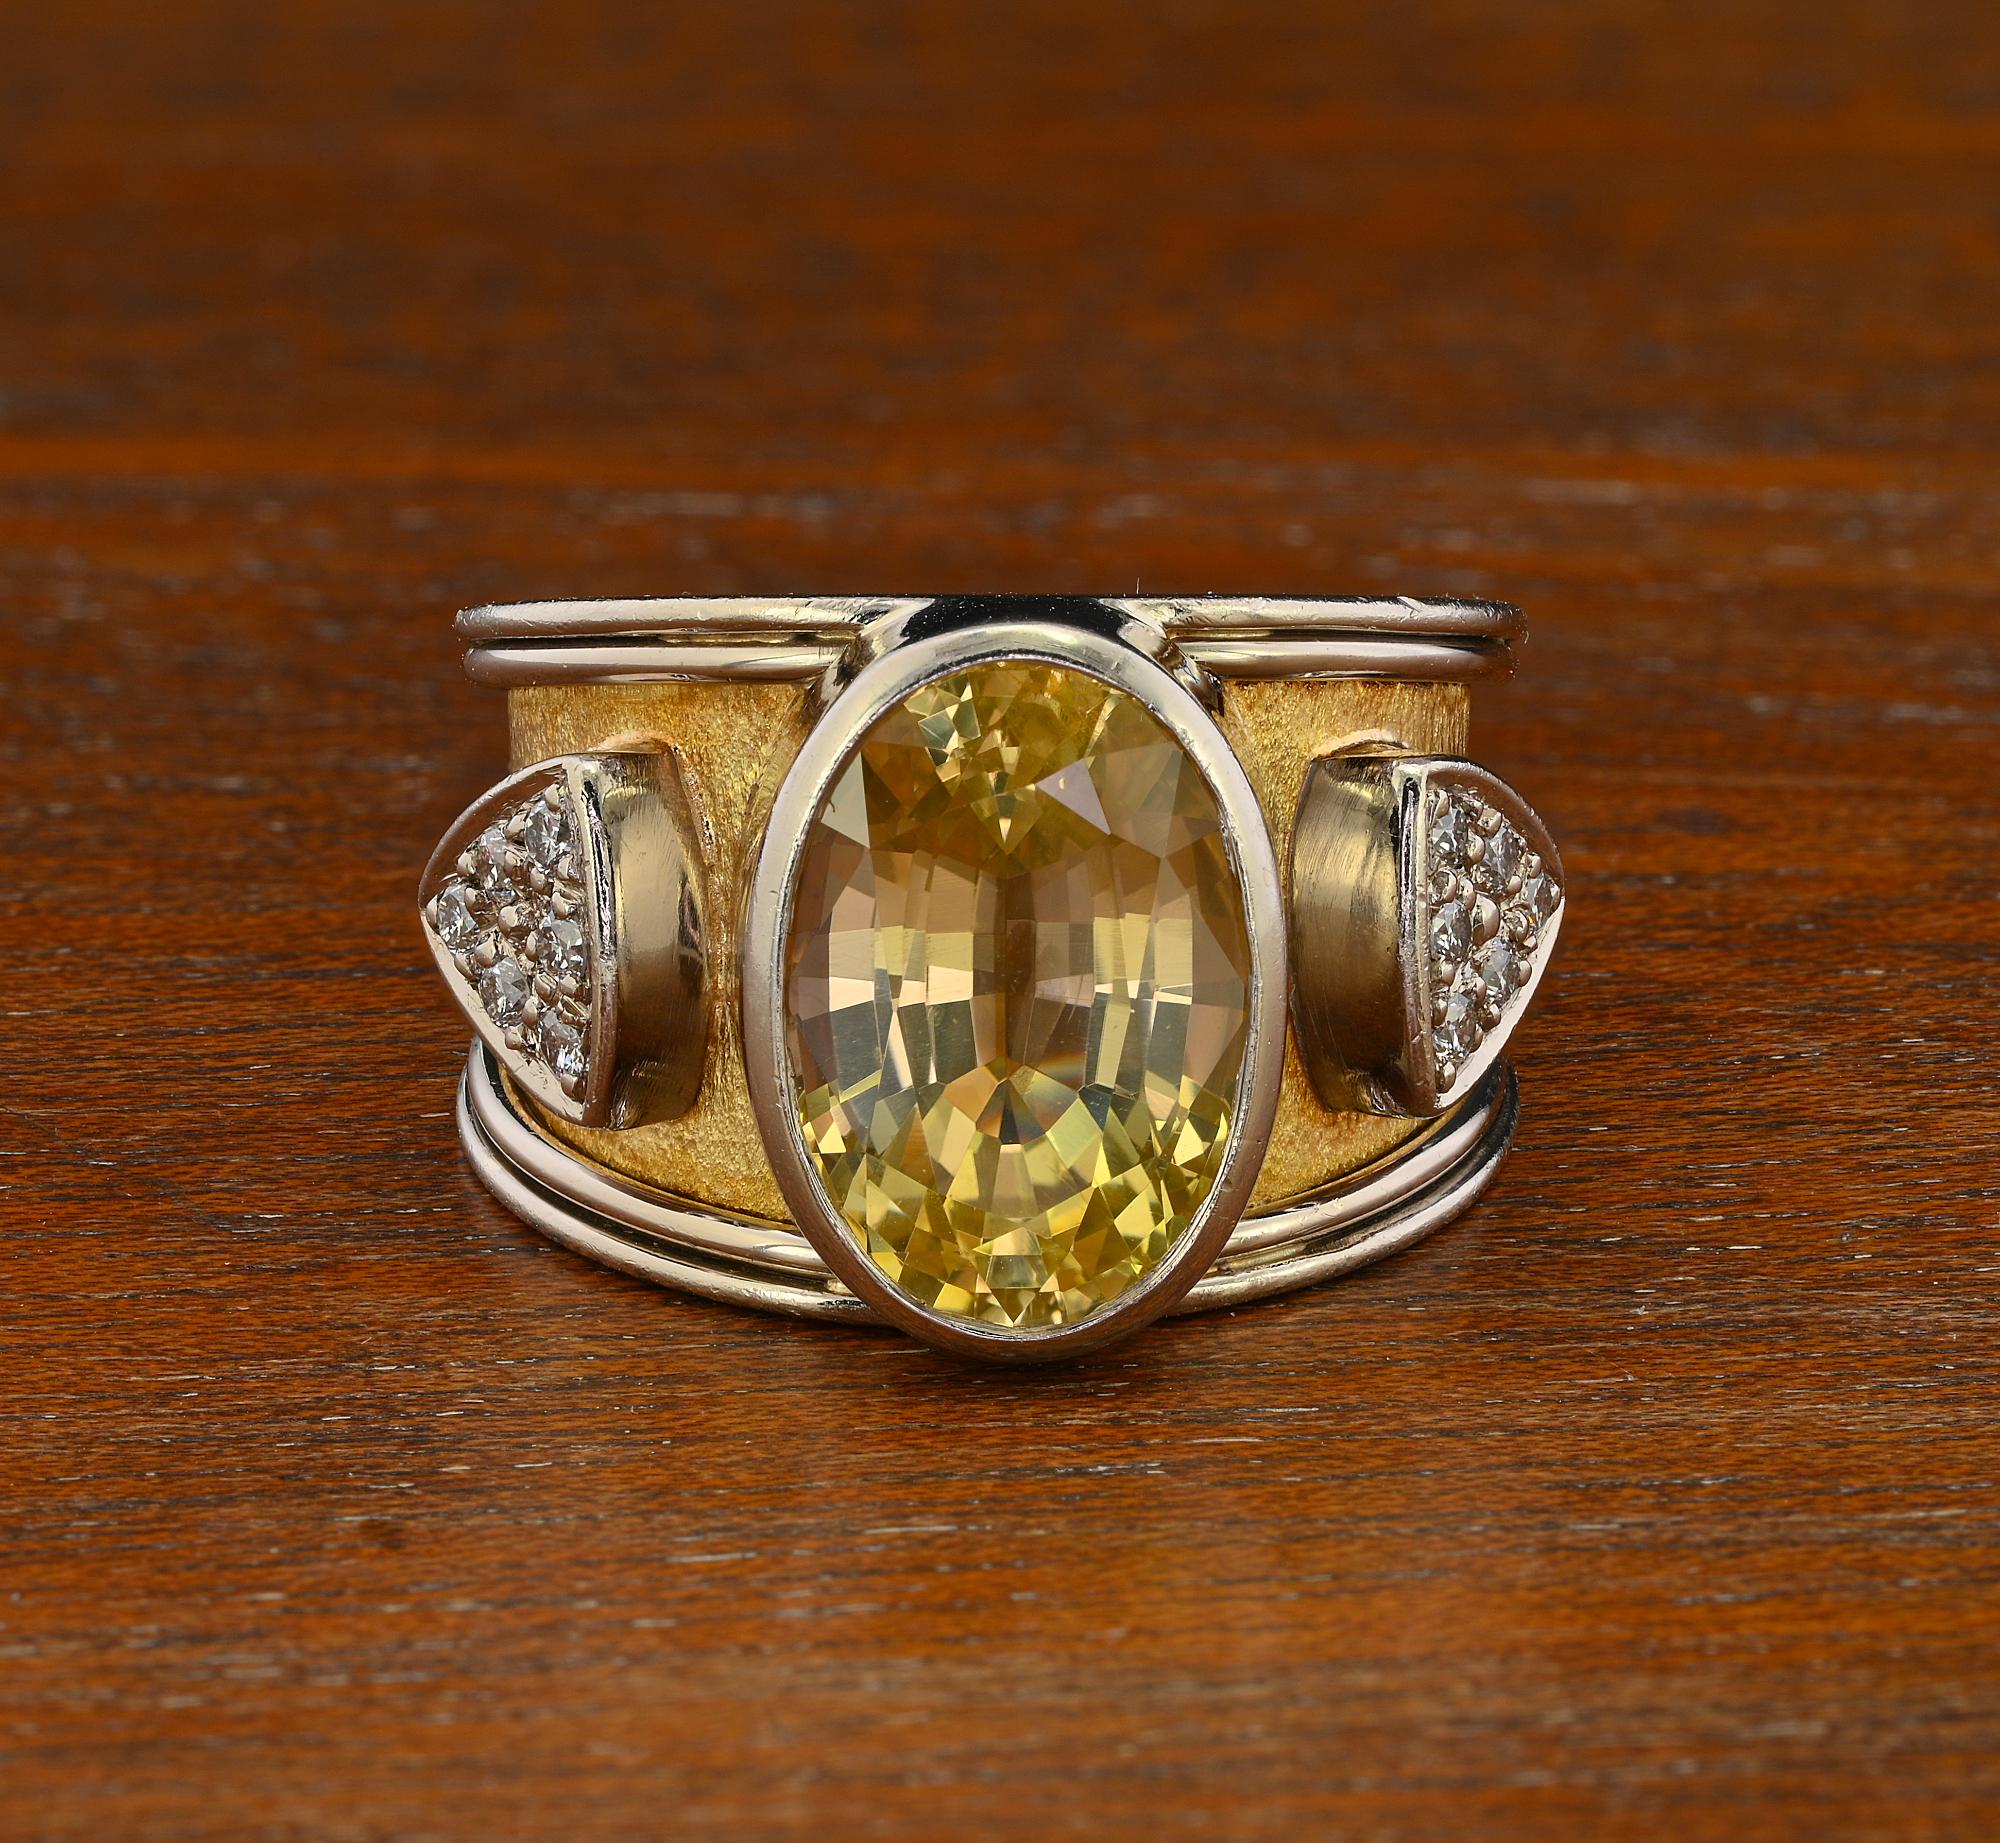 This outstanding estate has been skillfully hand crafted of 18 Kt gold, bears English hallmarks
Awesome combination of design, craftsmanship and gemstones which together create a timeless chic style
Focal point is a fascinating just shy of 9.0 full